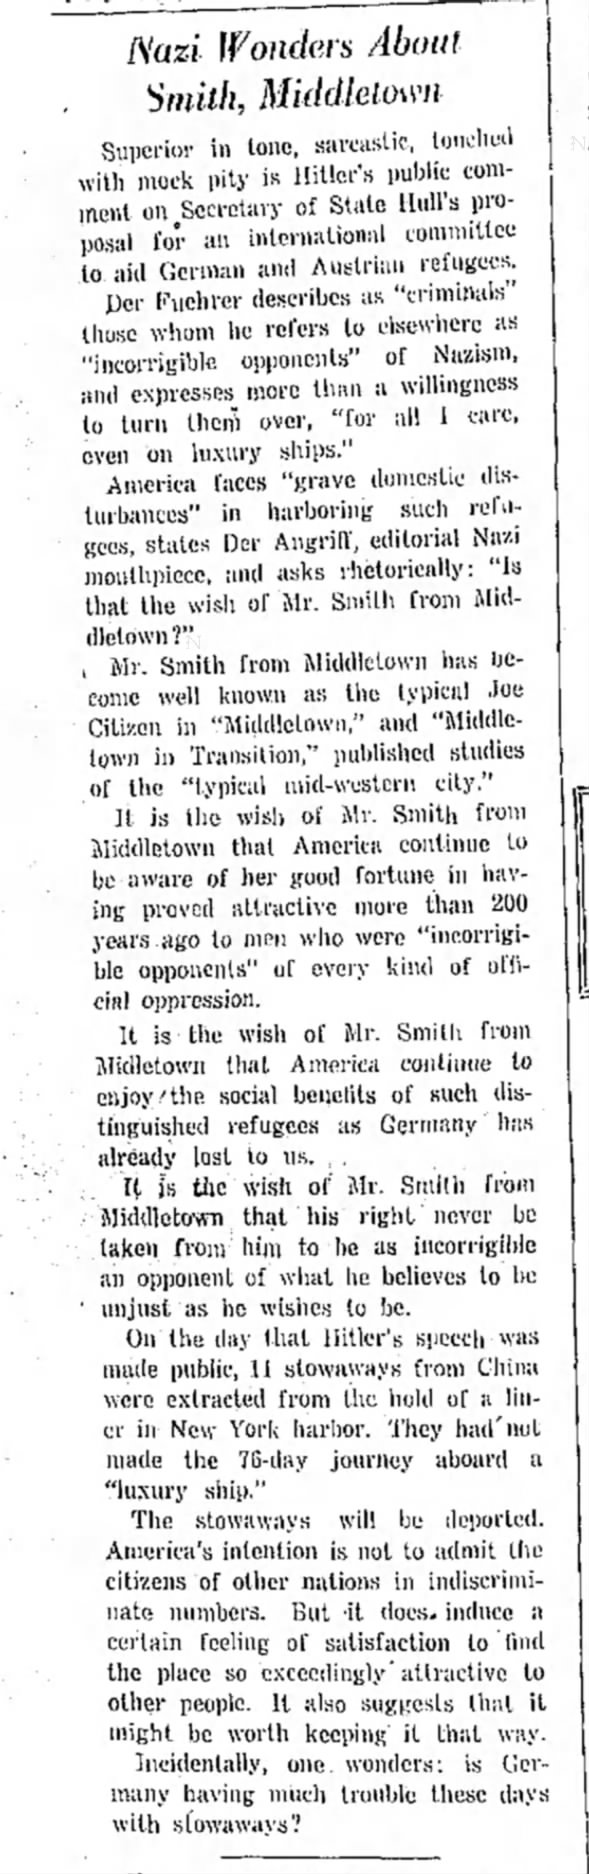 Nazi Wonders About Smith, Middletown